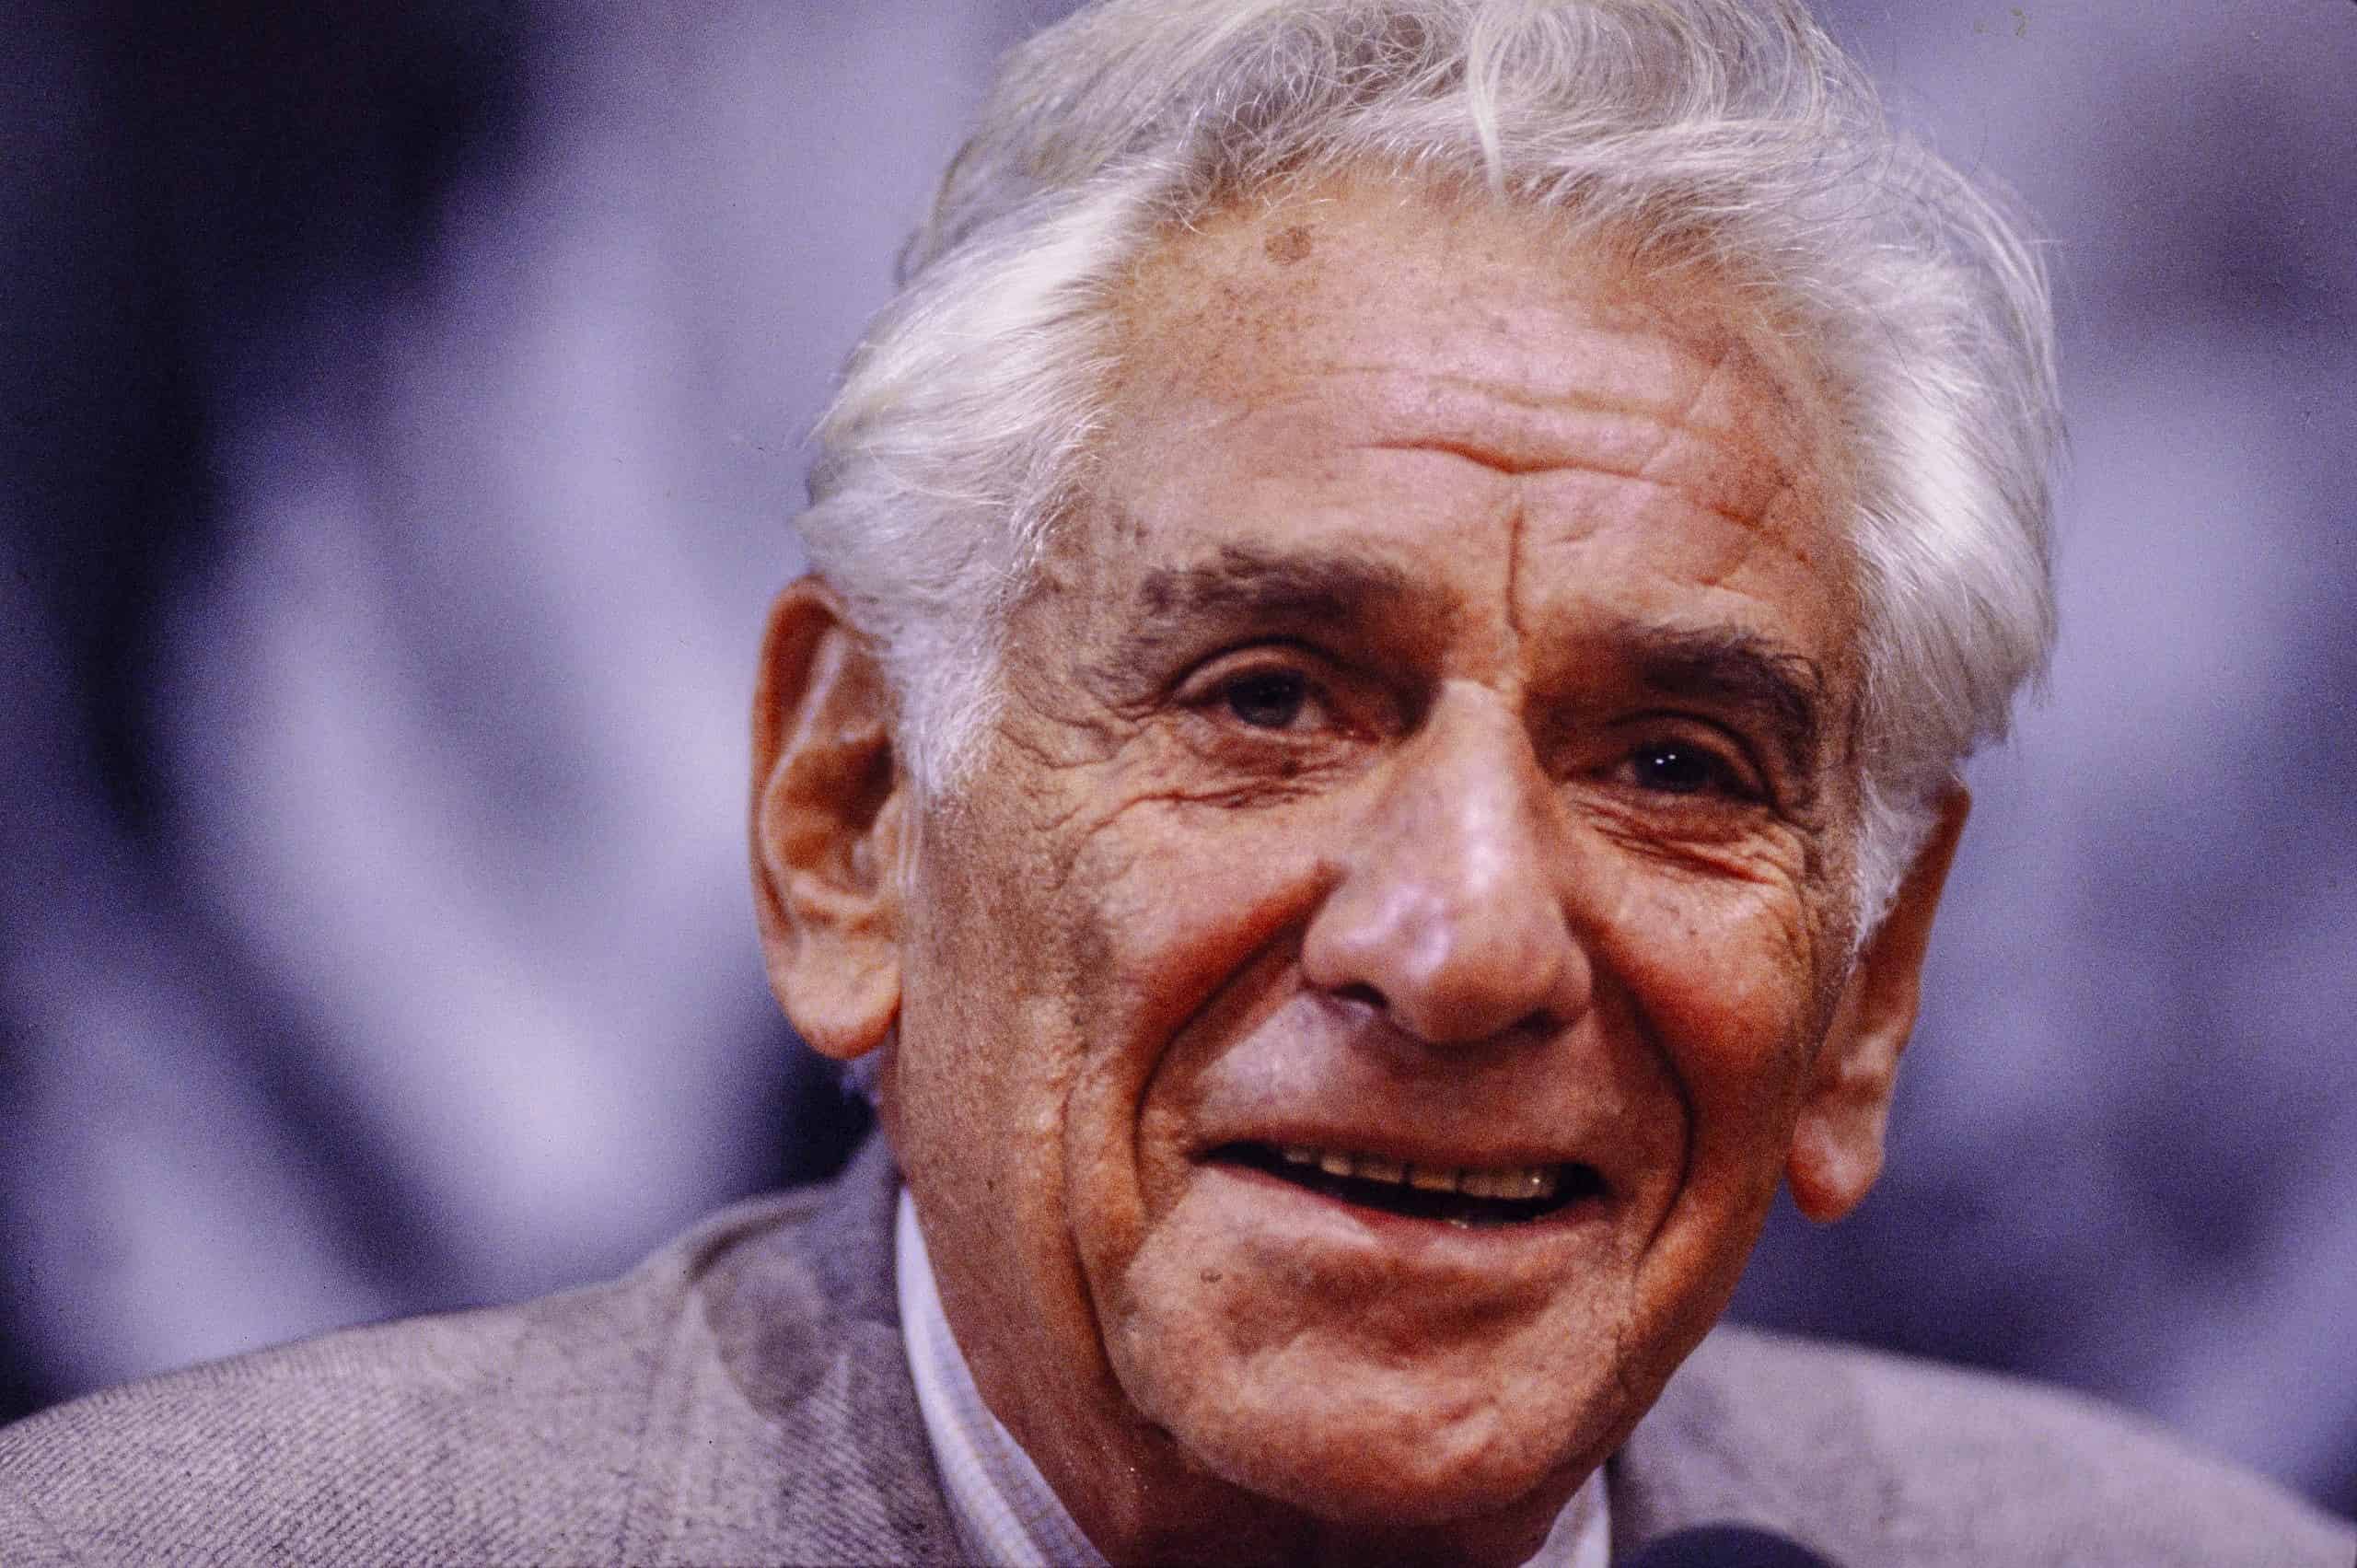 There was more to Leonard Bernstein than his sex life or his nose 